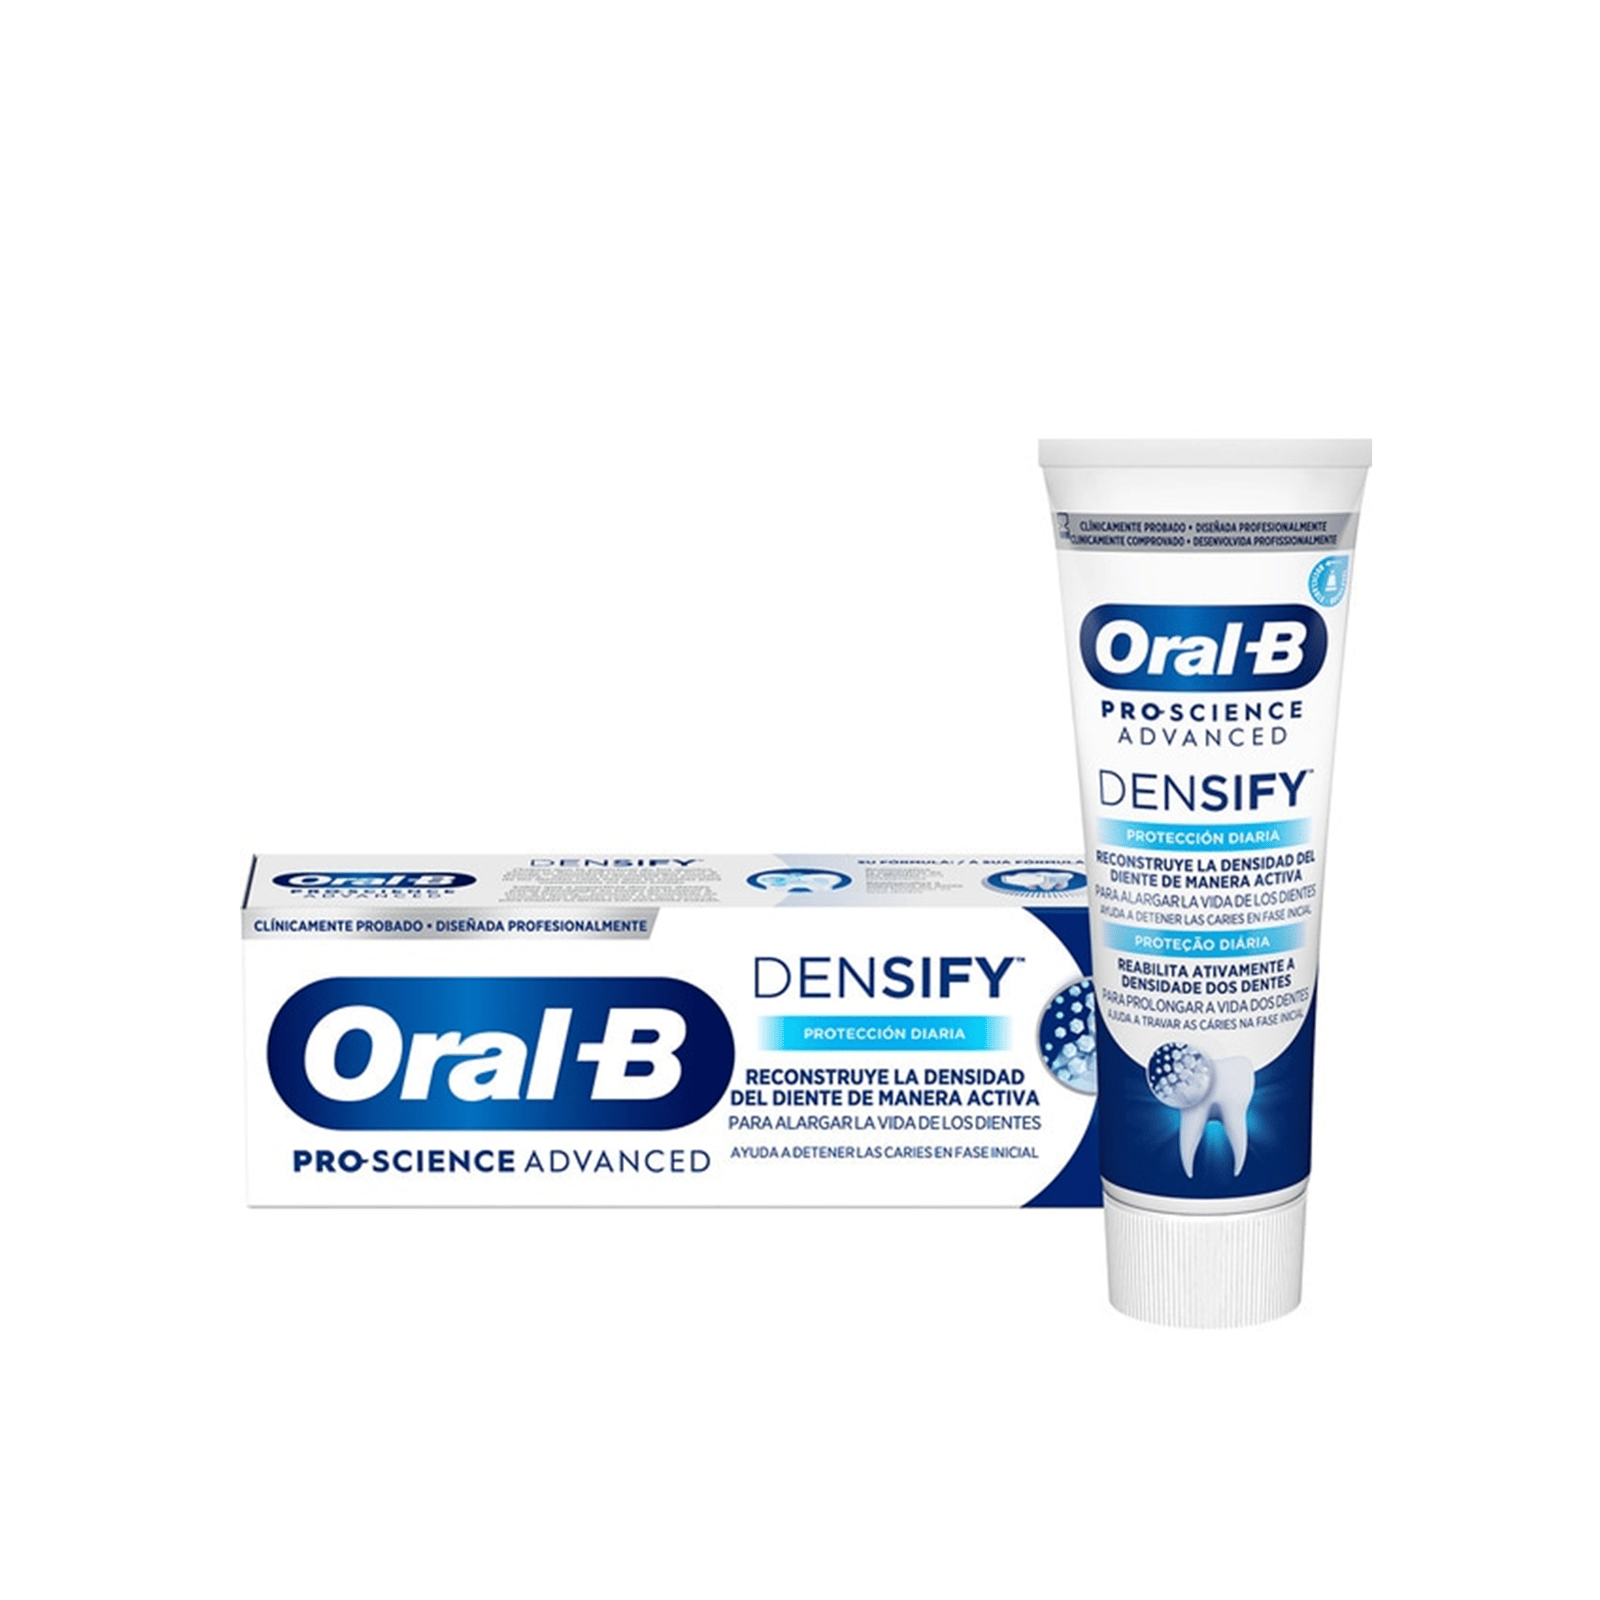 Oral-B Pro-Science Advanced Densify Daily Protection Toothpaste 75ml (2.53 fl oz)